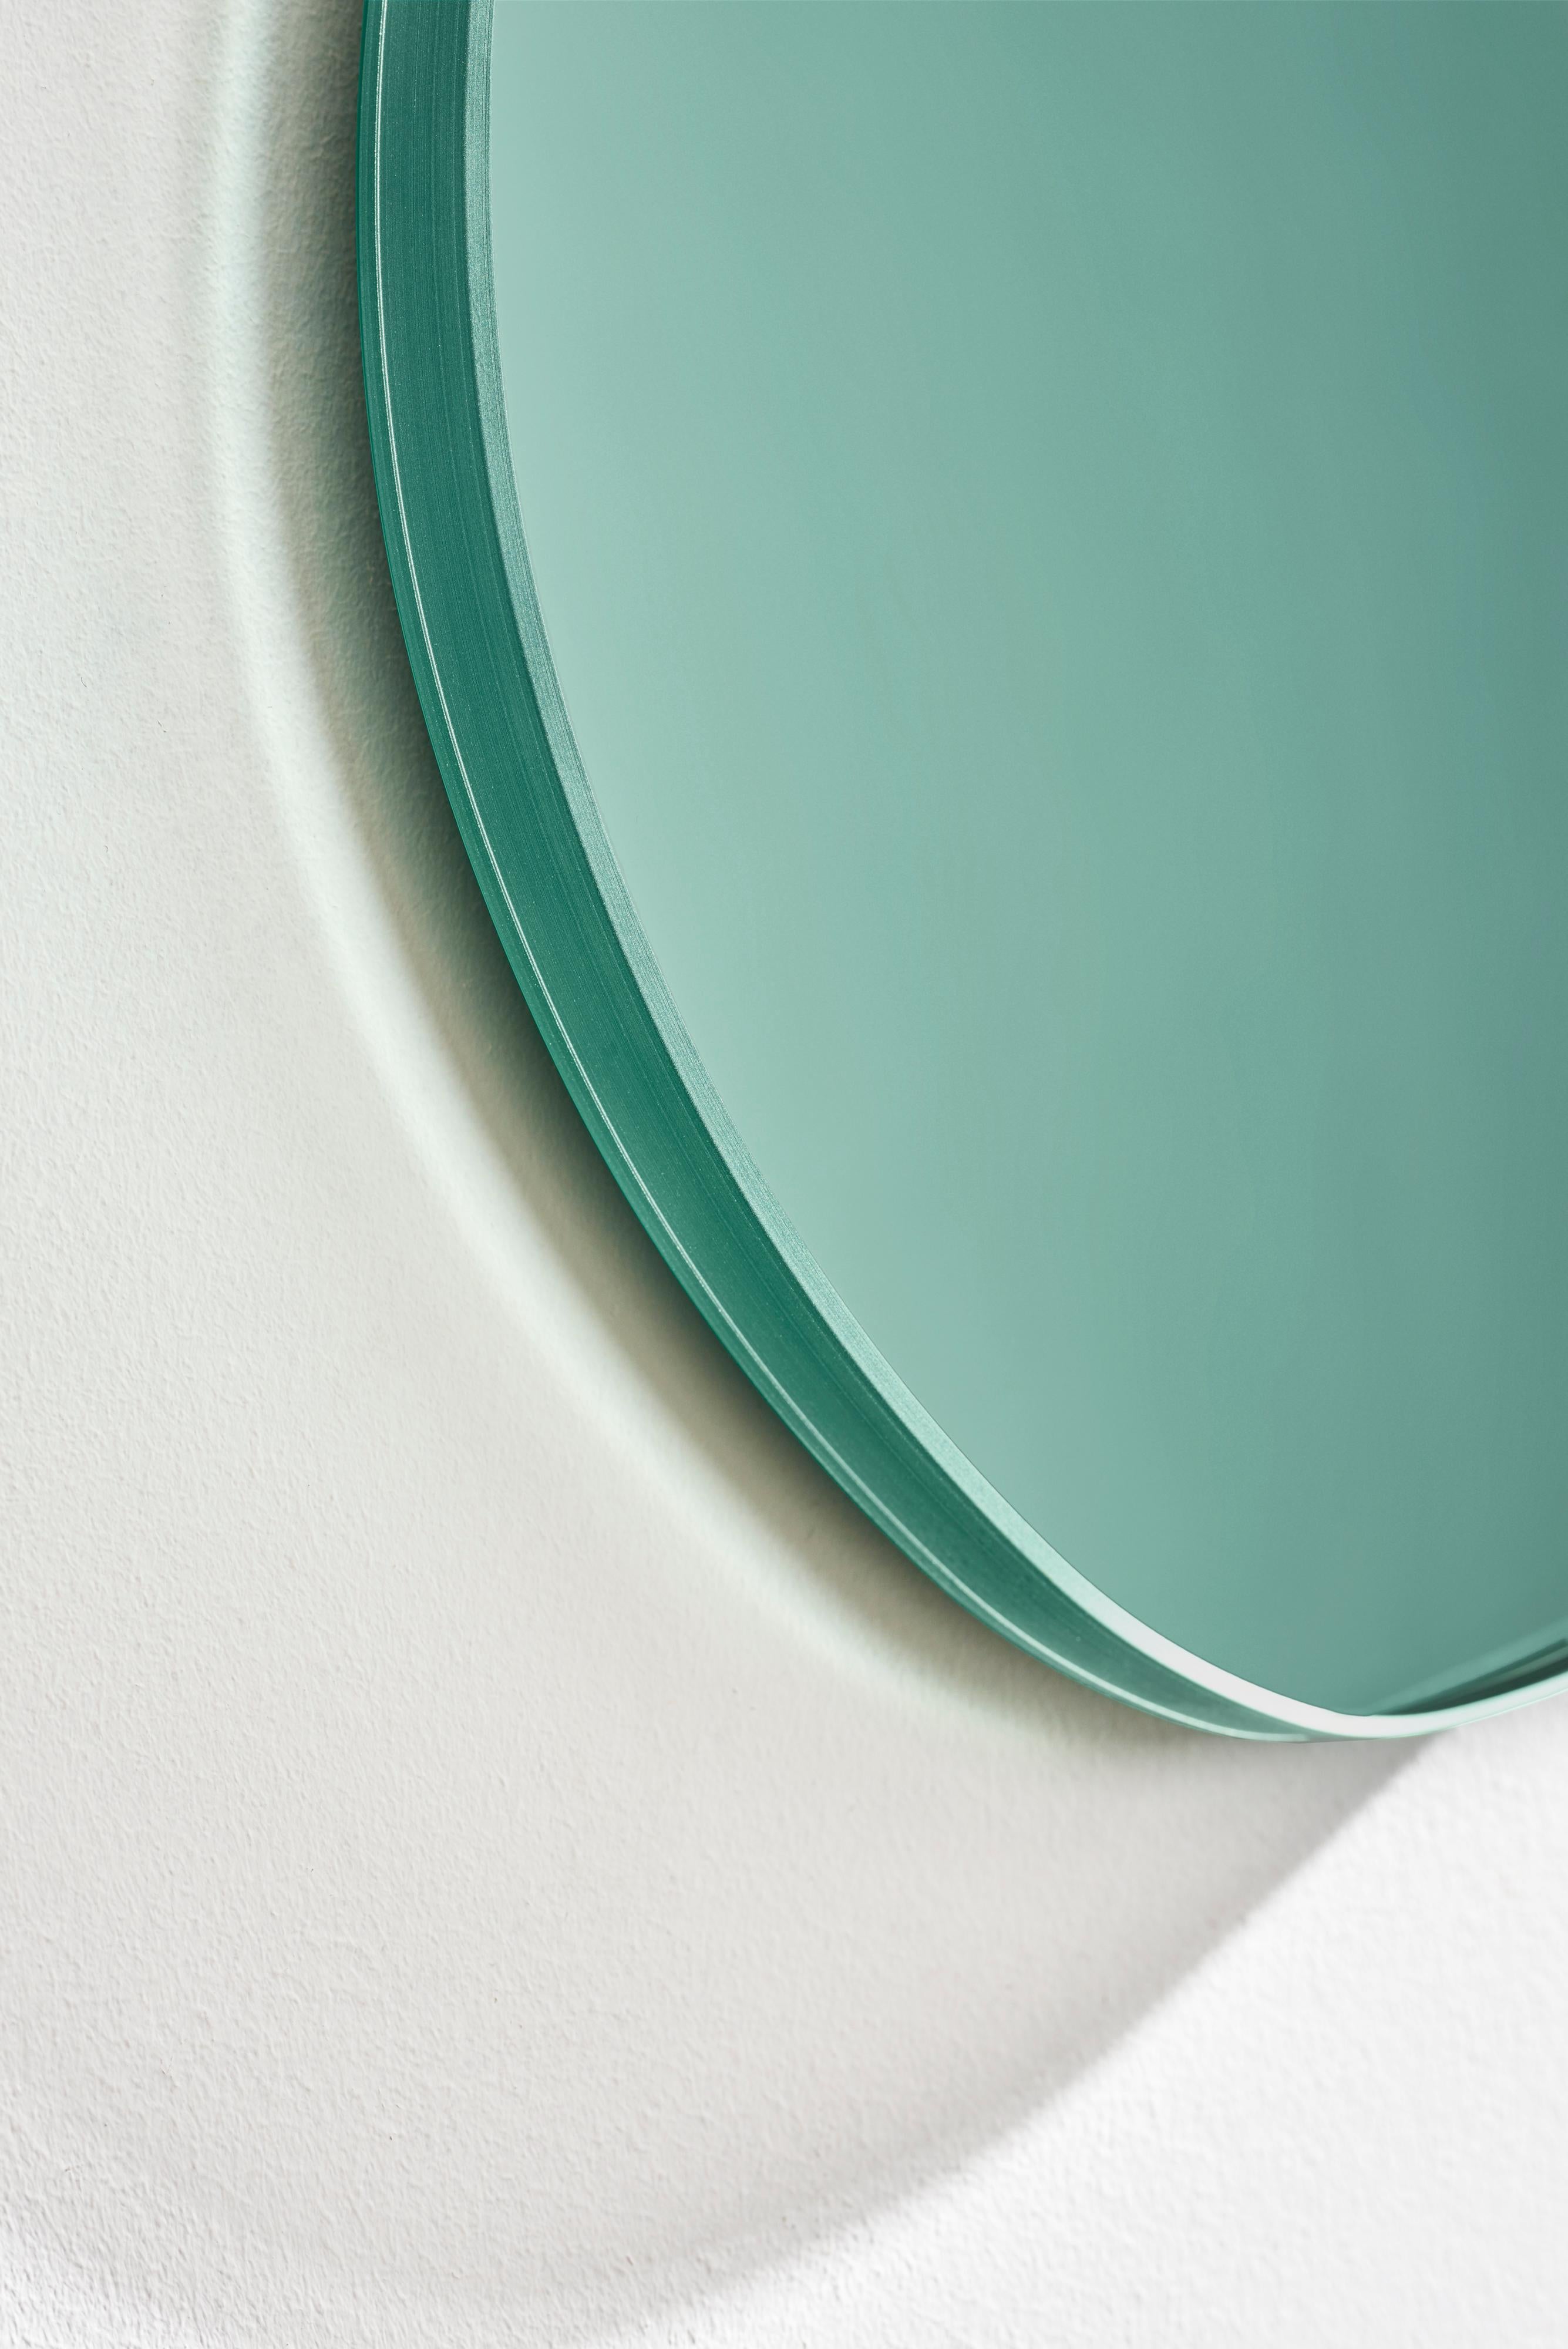 Dutch Contemporary Seeing Glass Off Round Wall Mirror 550, Green, by Sabine Marcelis For Sale